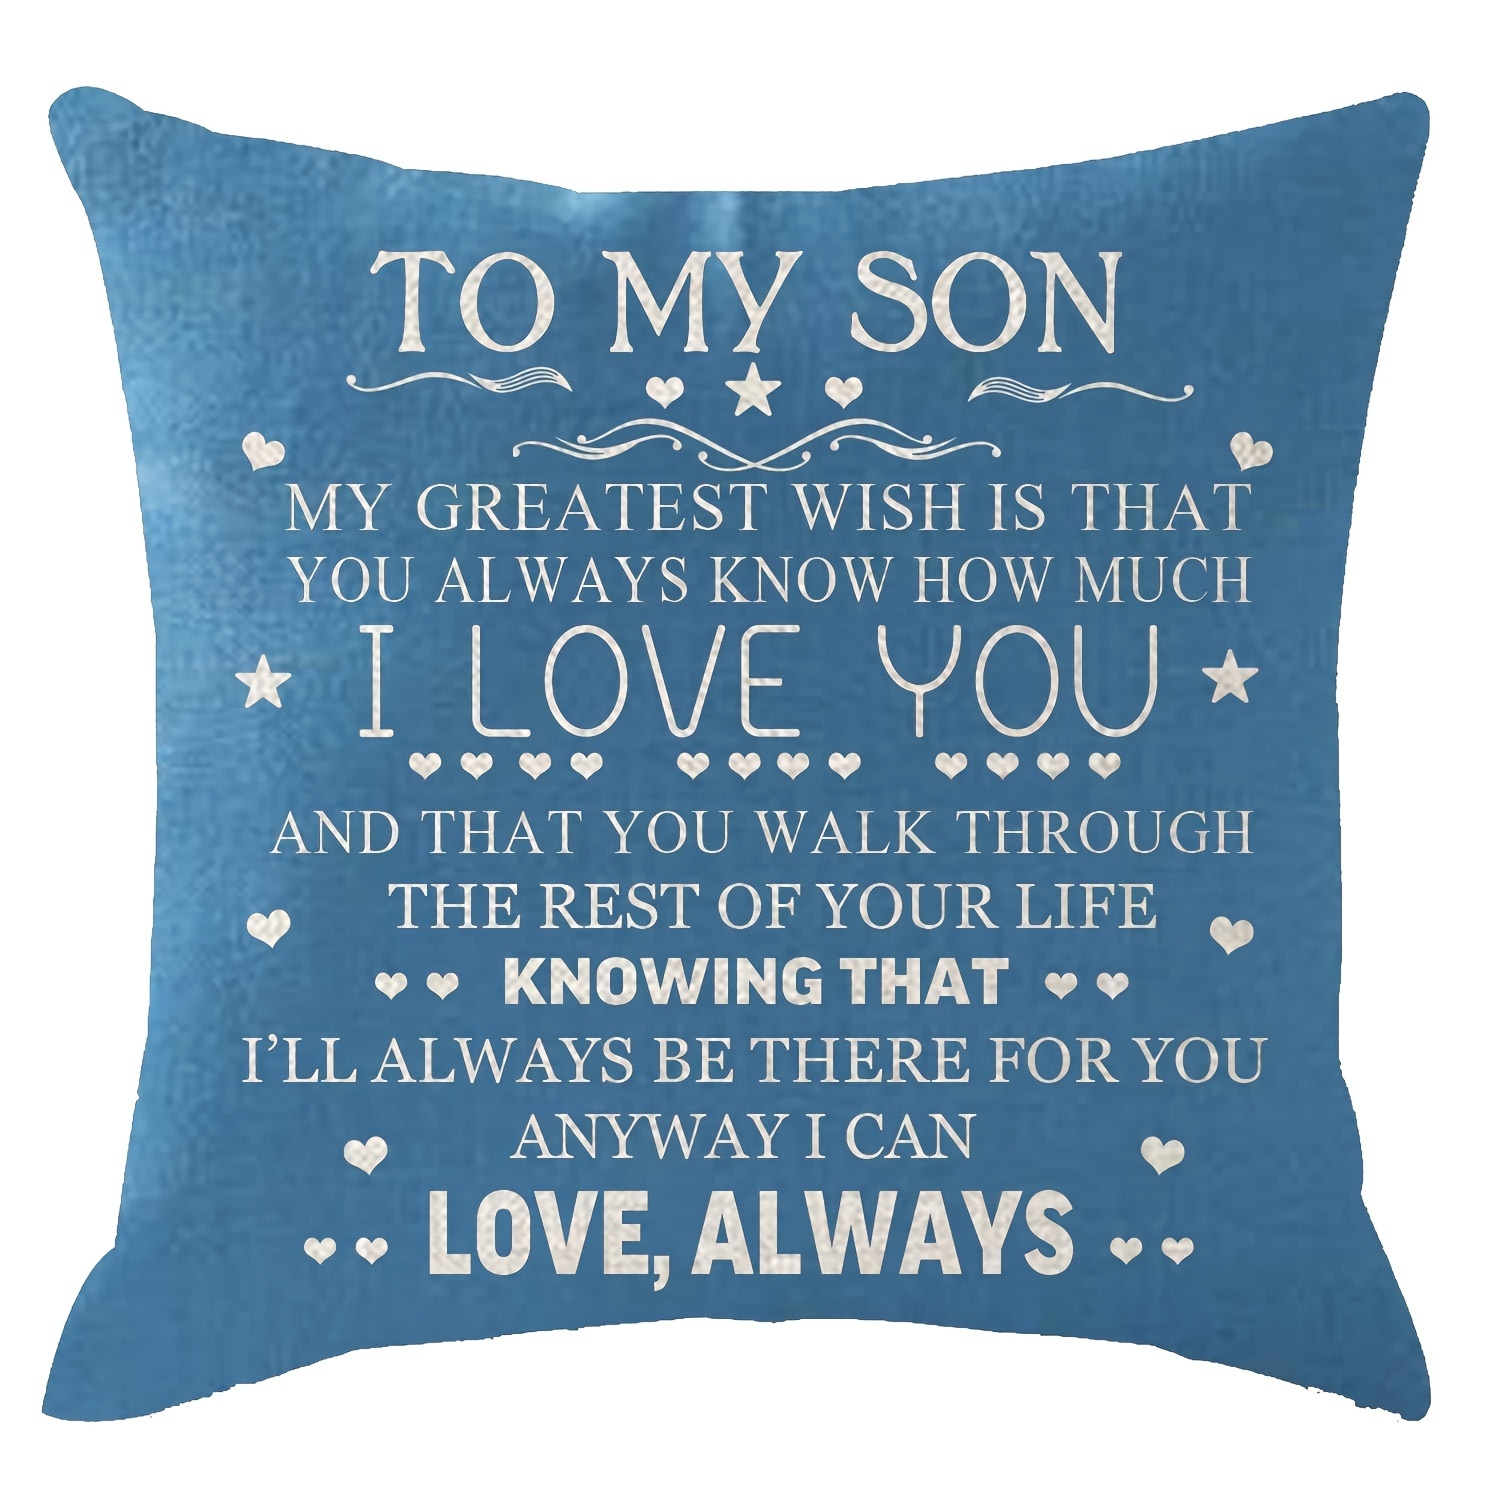 

1pc Itfro Son Christmas Birthday Gift My Greatest Wish Is That You Always Know How Much I Love You Blue Pillow Case Cushion Cover For Sofa Square,(short Plush Decor 18x18 Inch Without Pillow Core)